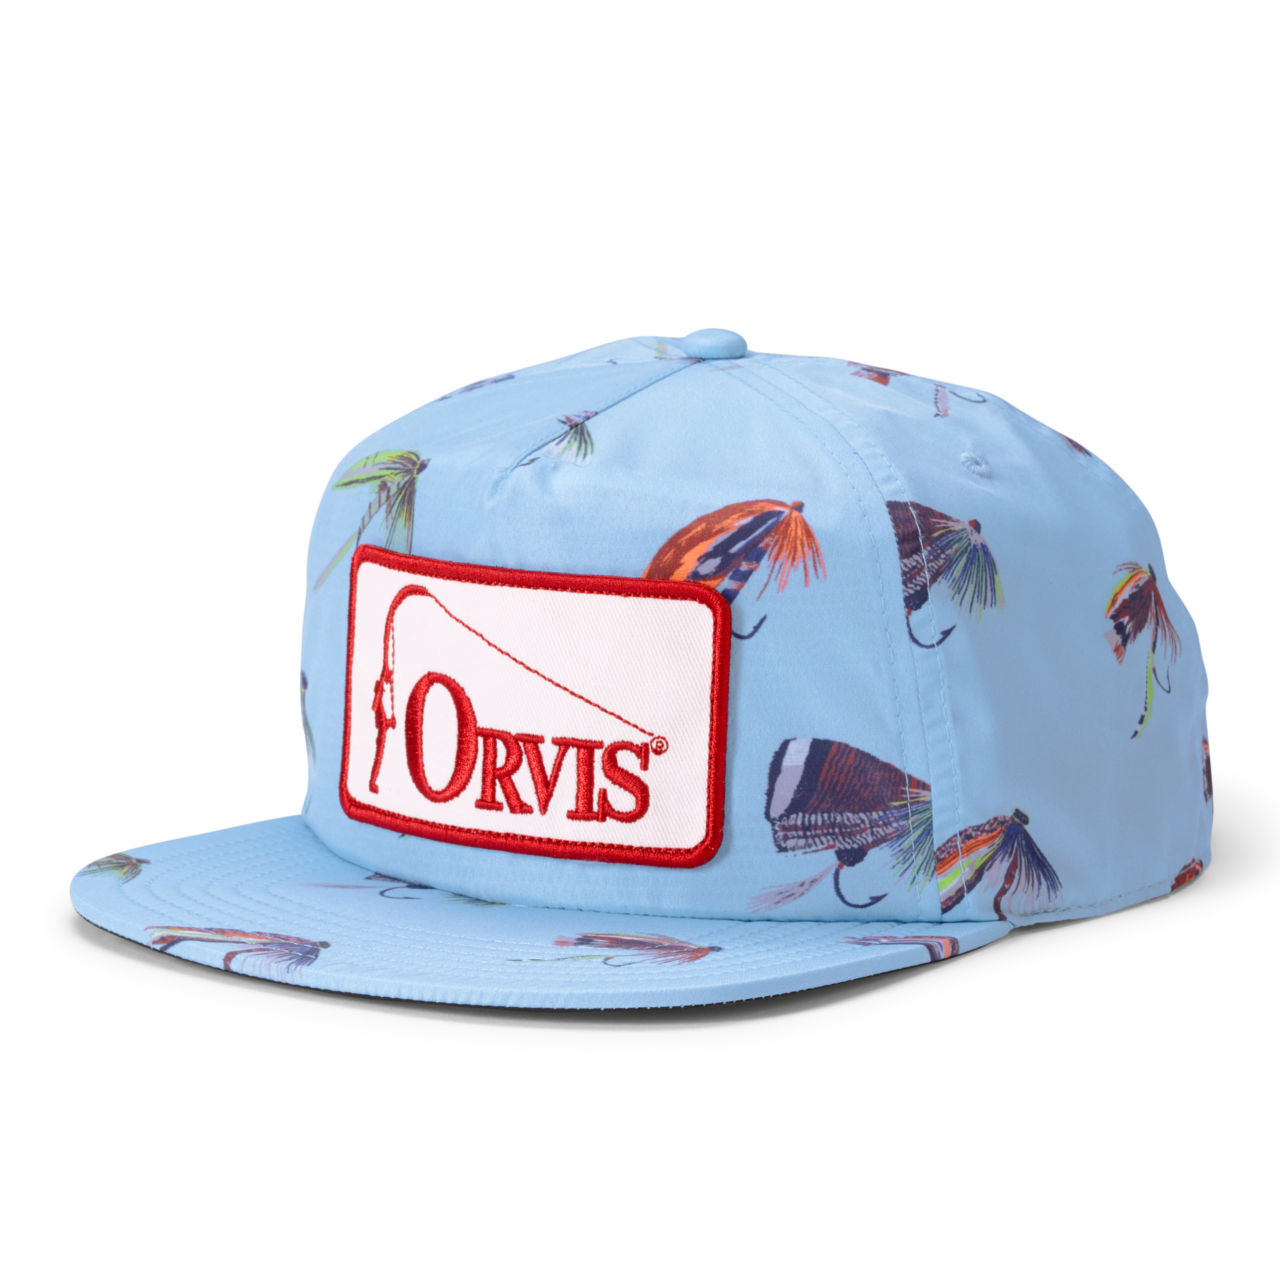 Mary Orvis Flies Hat - BLUE image number 0